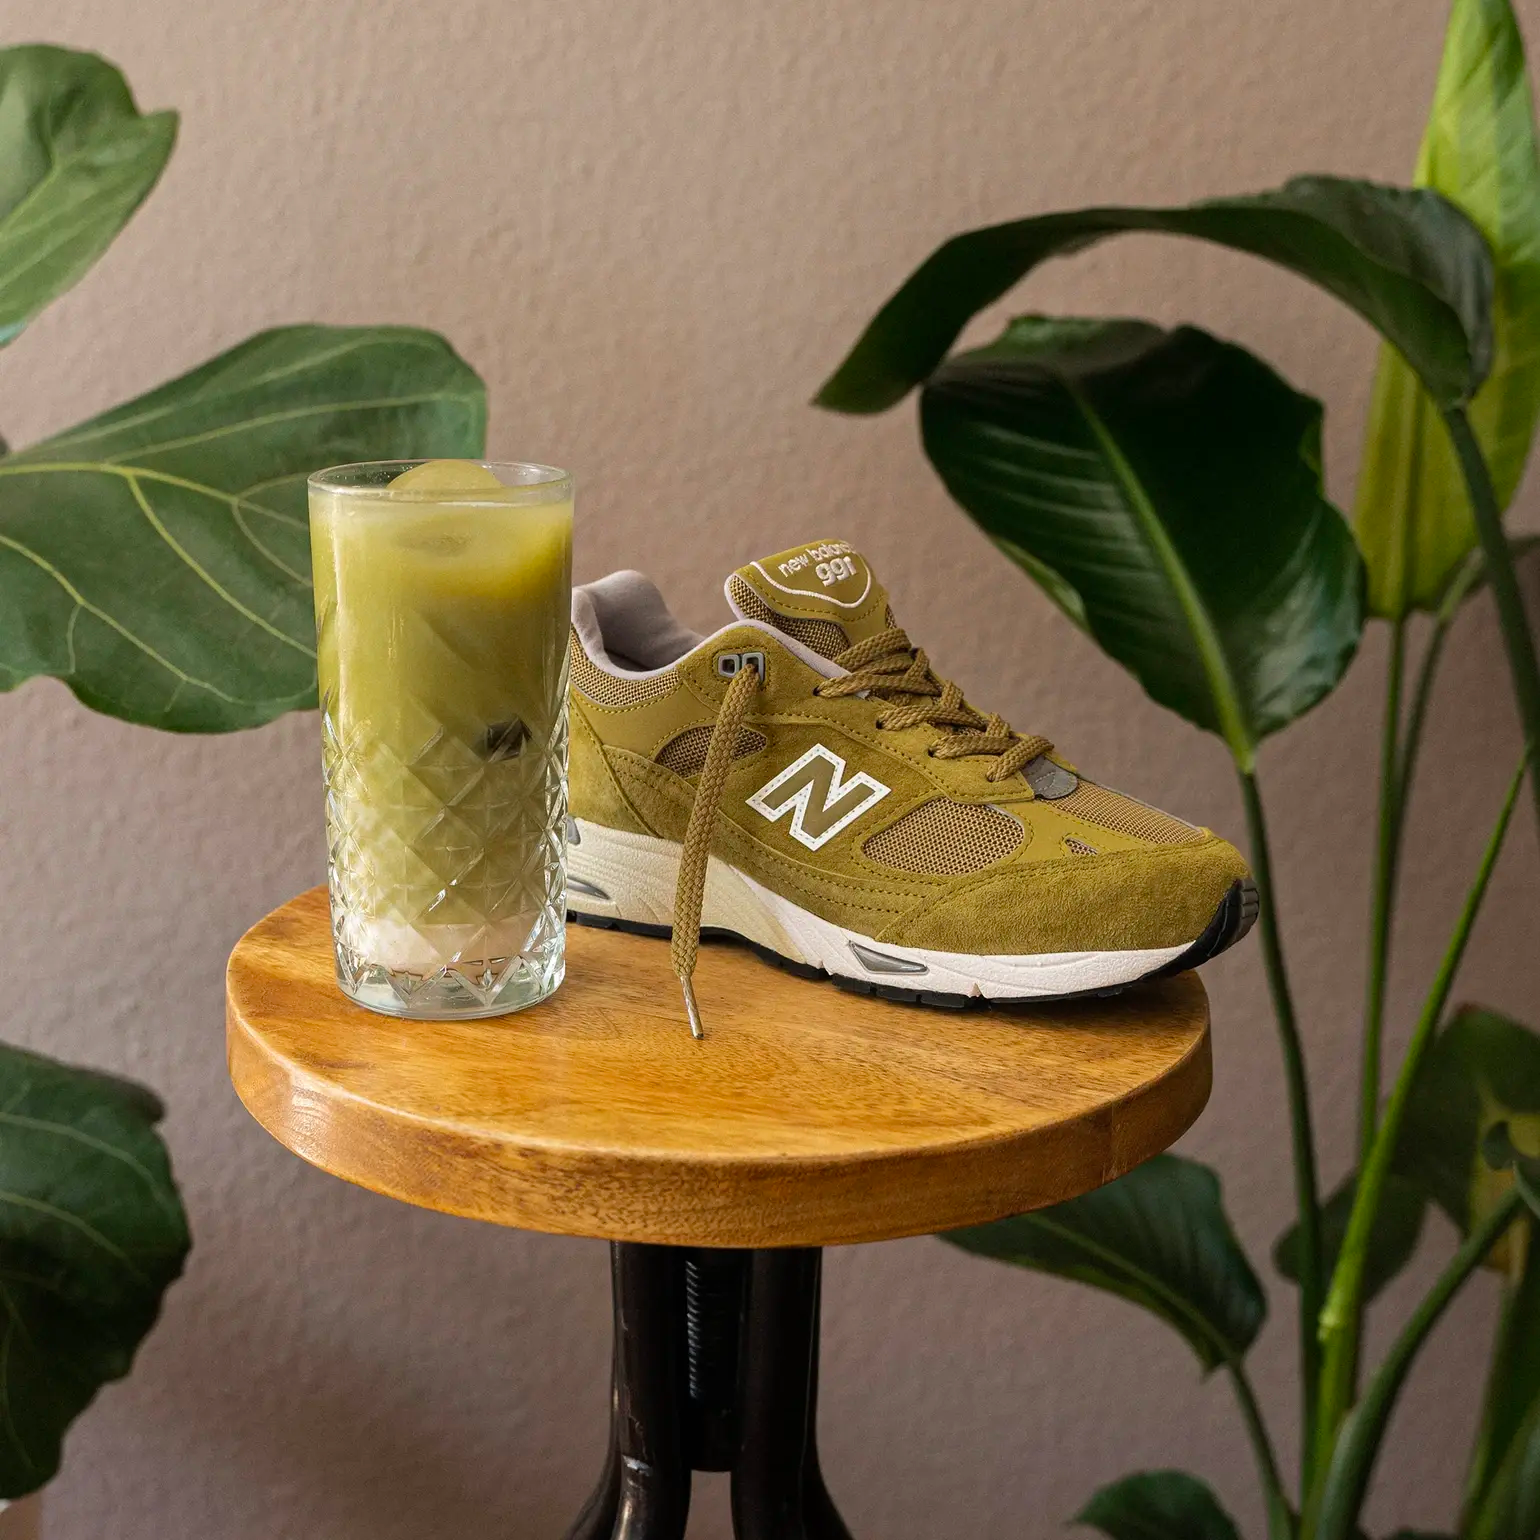 Green Graces the New Balance 991